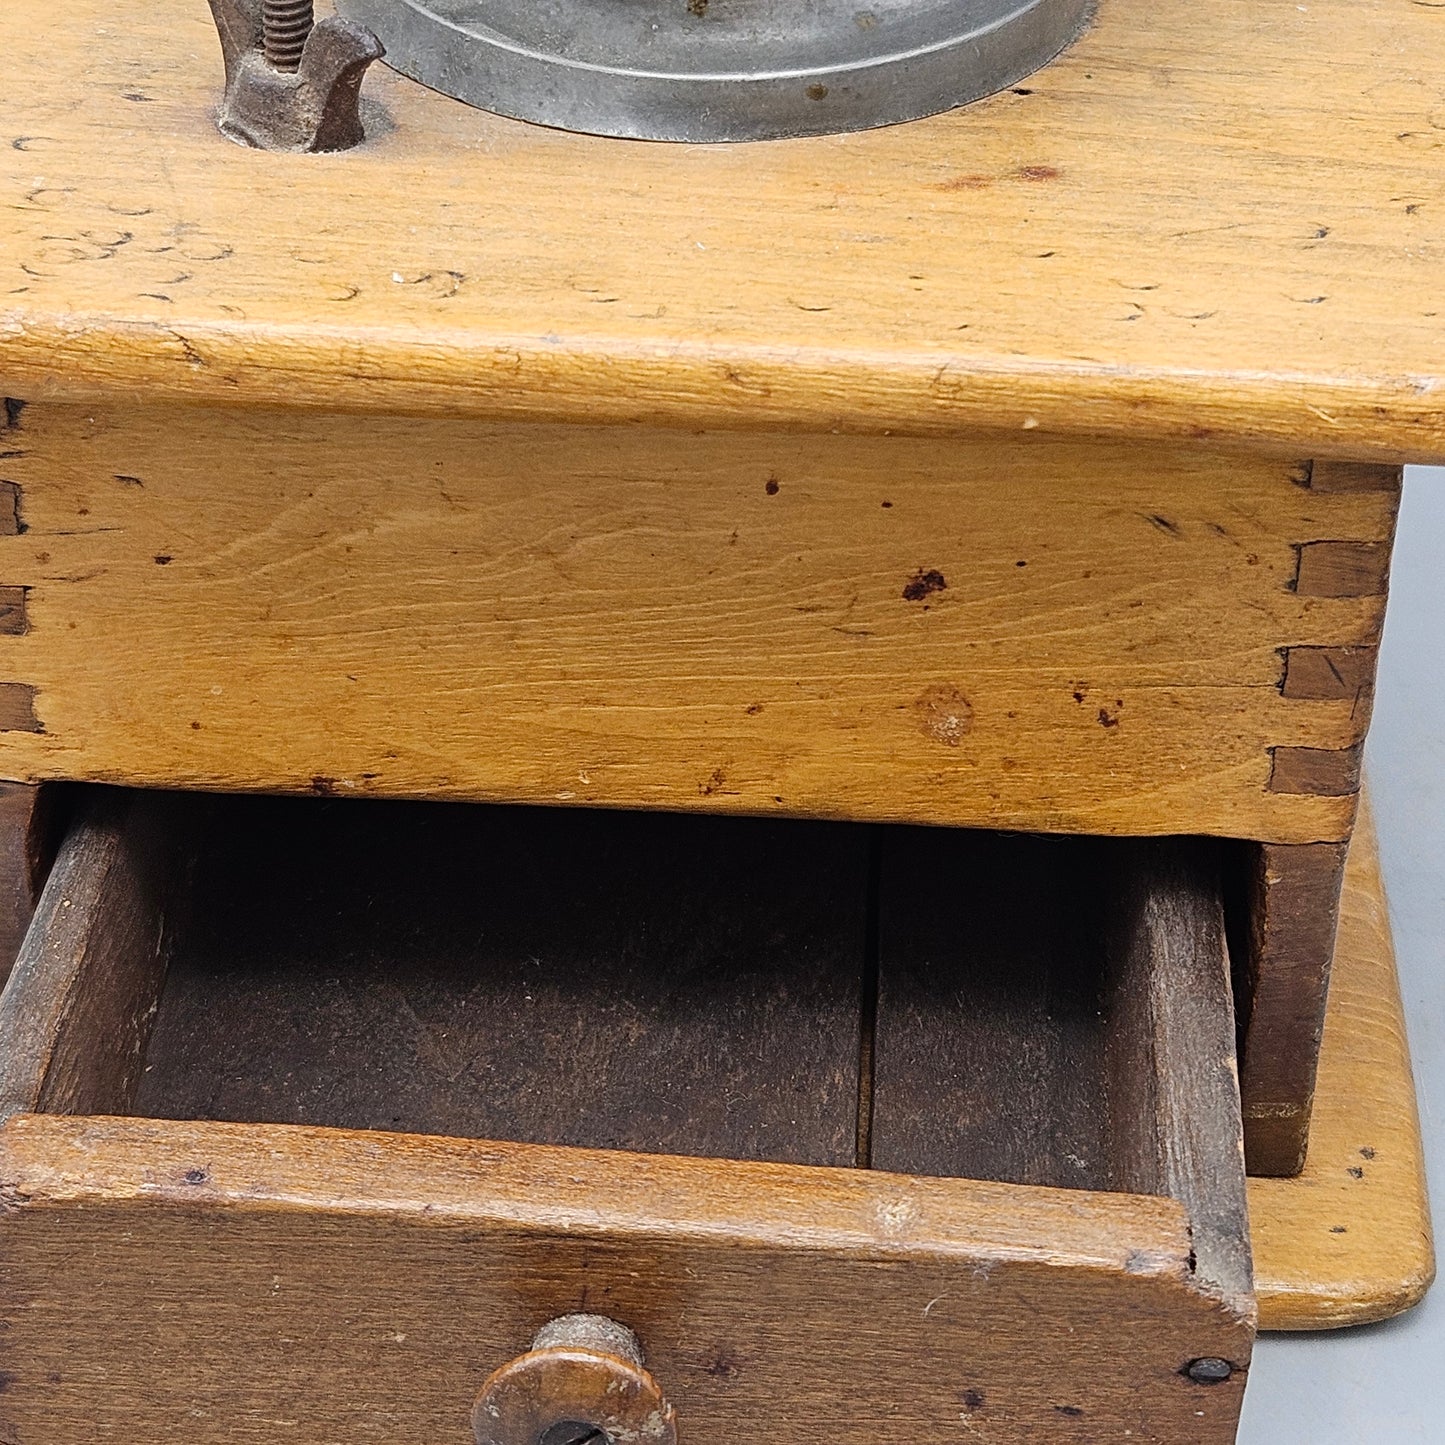 Antique Wooden Coffee Mill